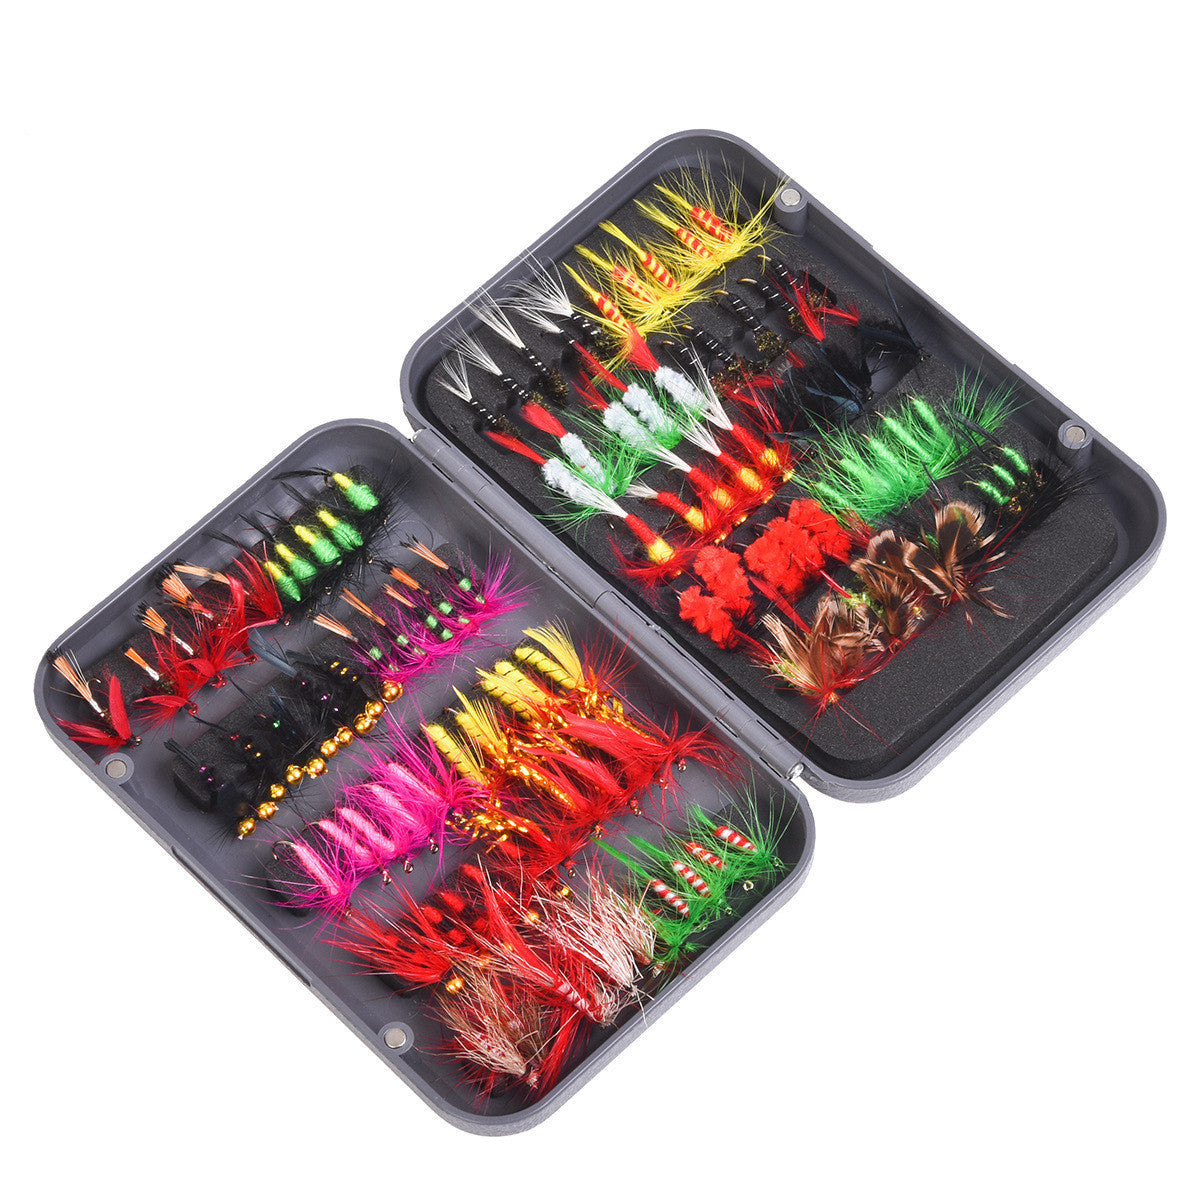 Fishing Flies - 100 Piece Tackle Box with Vivid Appearance and Barbed Hooks